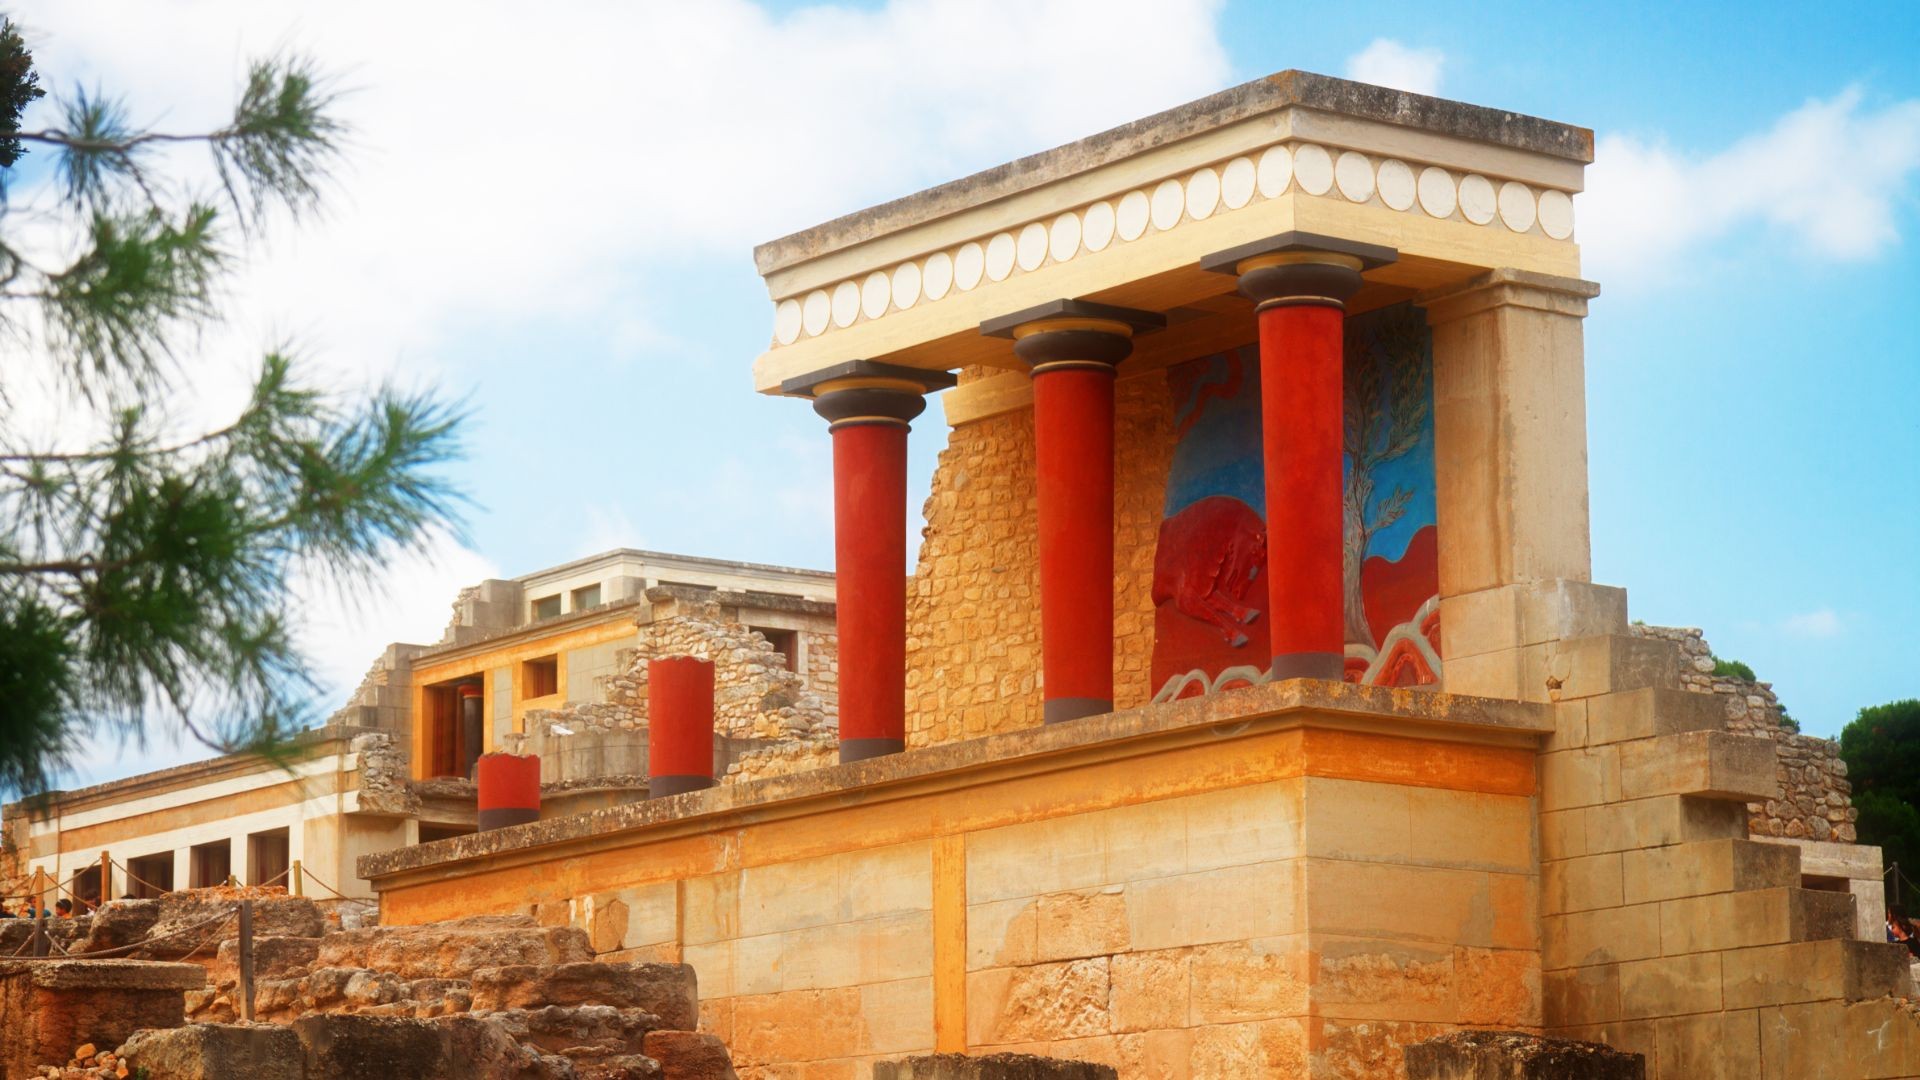 Knossos Palace: Journey into the Heart of Minoan Civilization in Crete